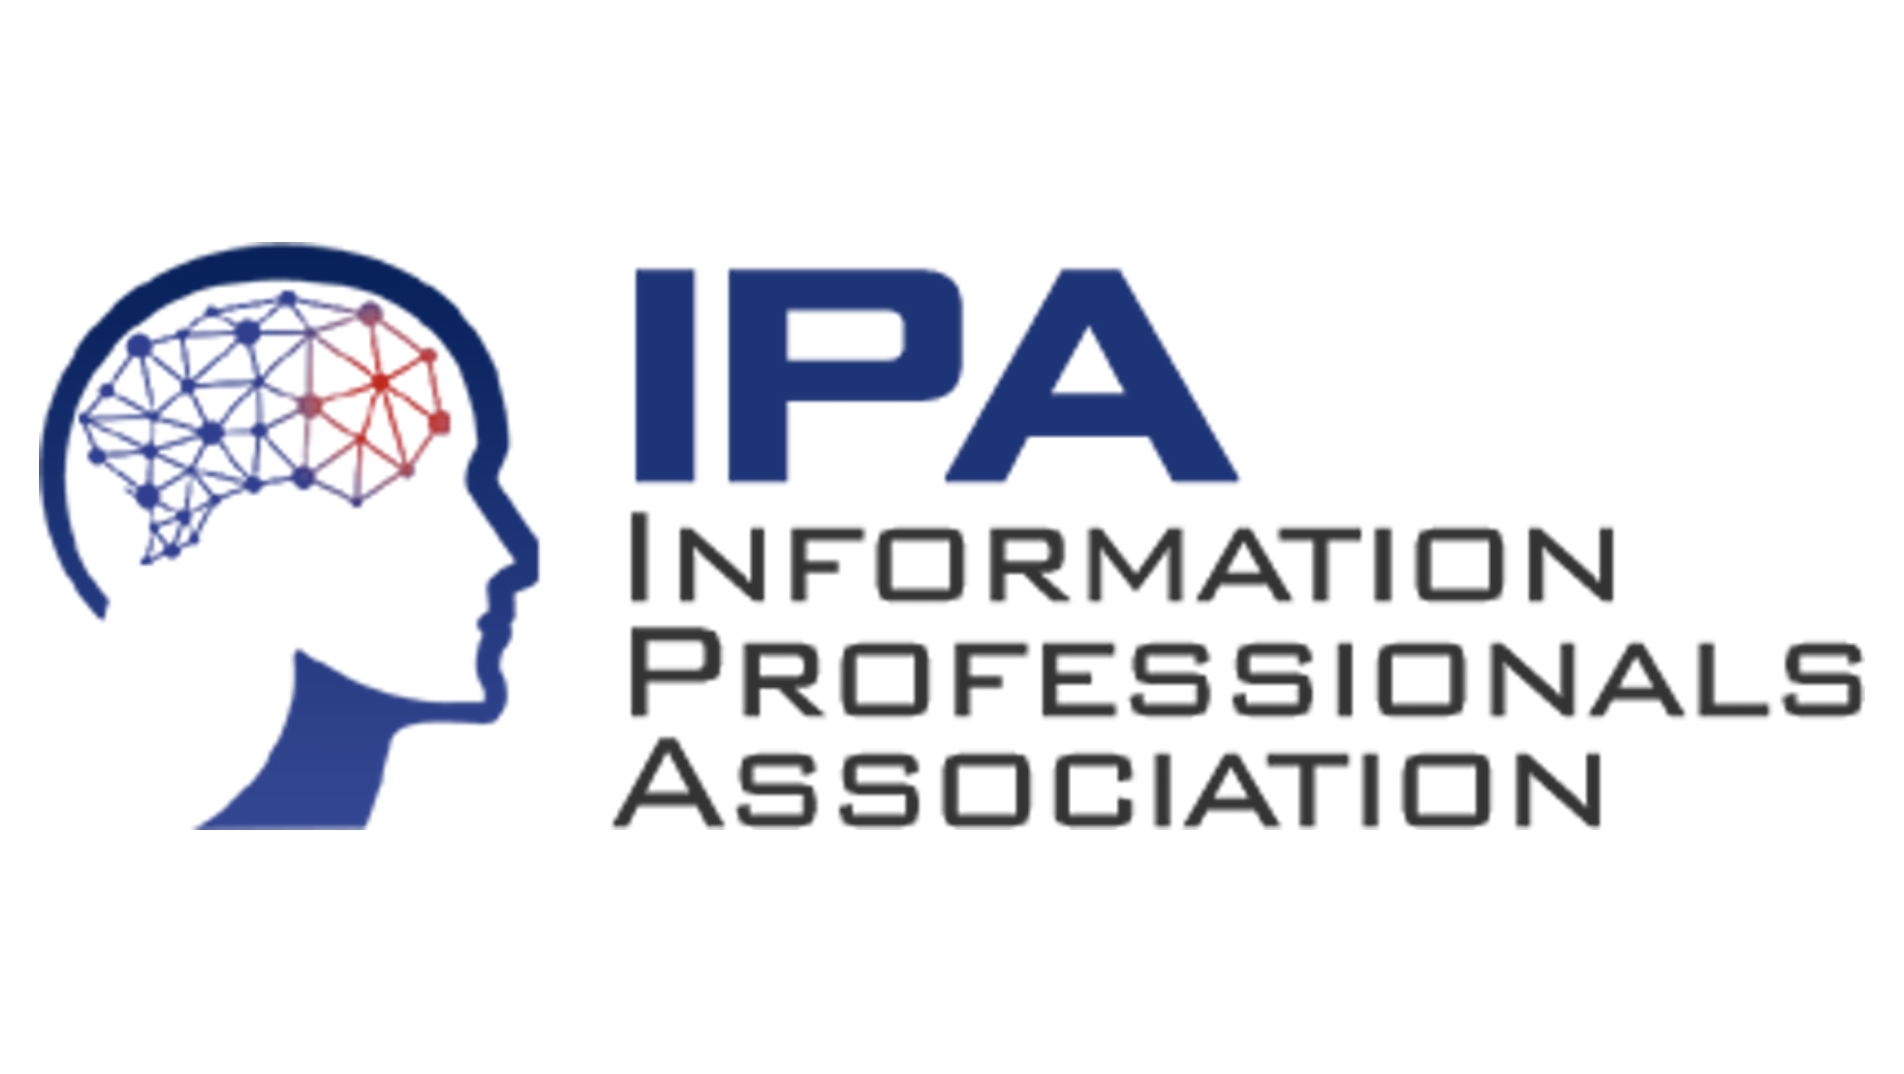 IPA's logo which shows the outline of a human head with a networked brain on the viewer's left. To the viewer's right is "IPA" stacked atop "Information Professionals Association," which is in three stacked lines.